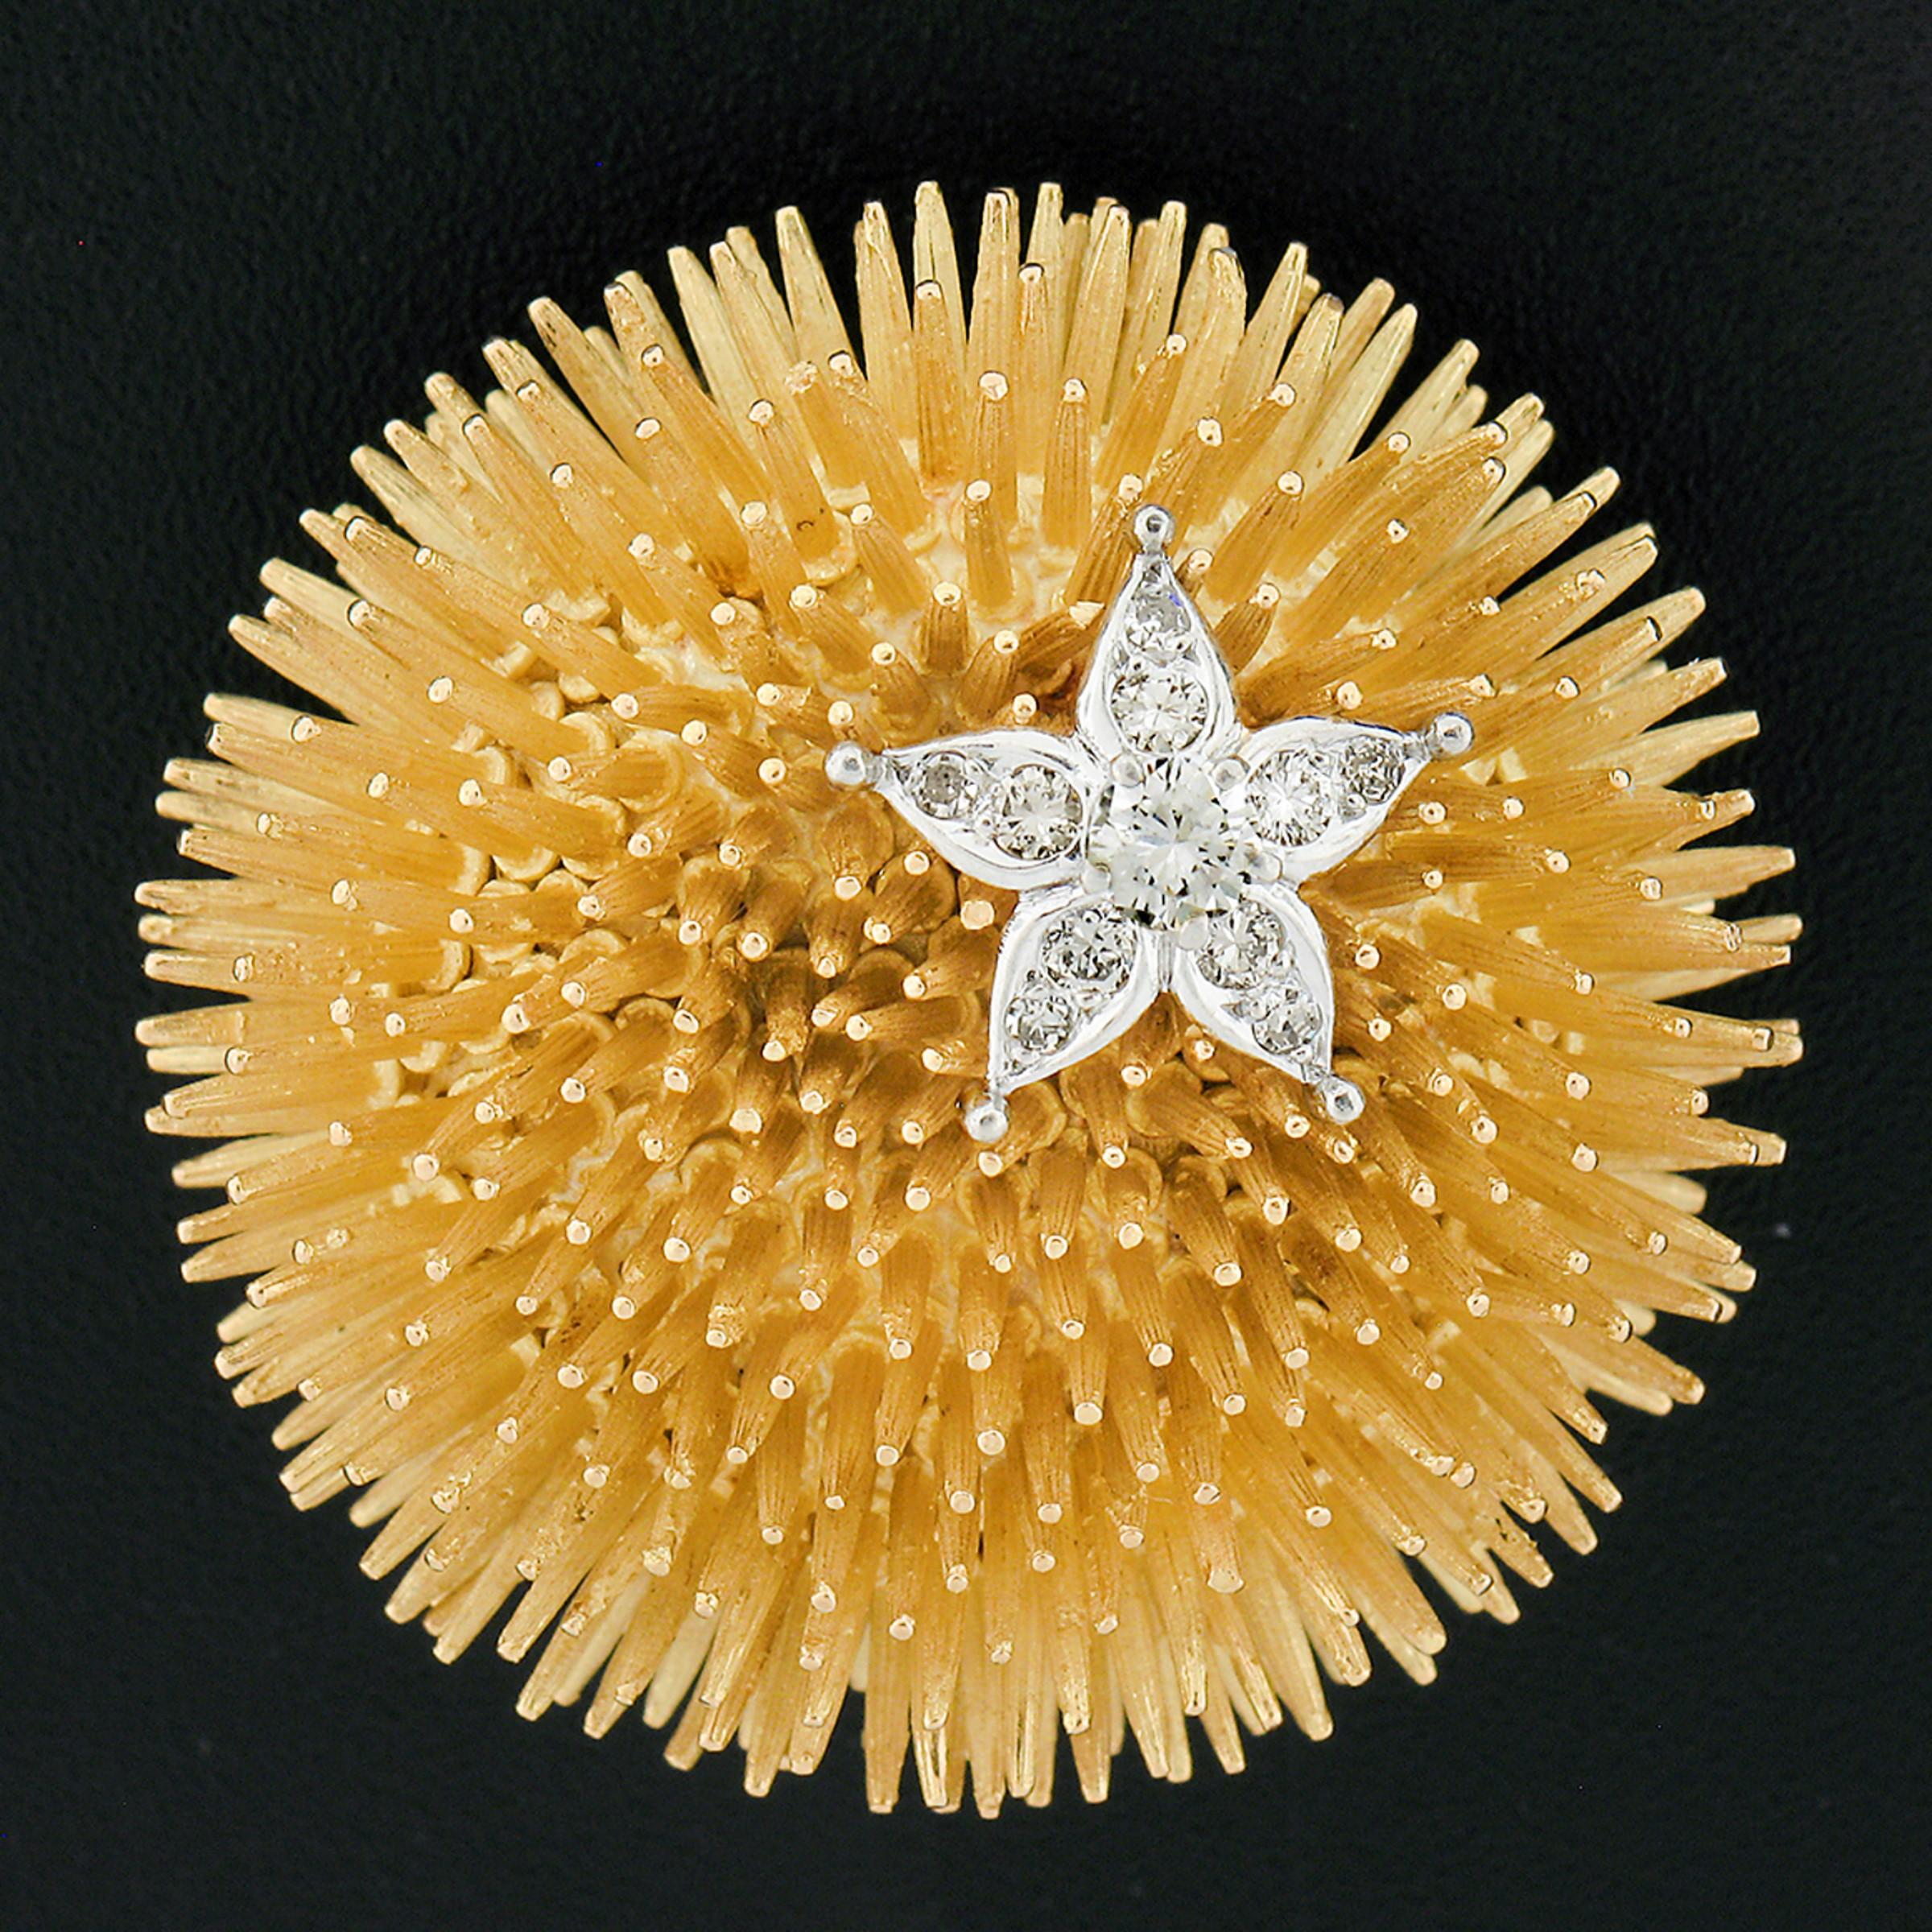 Here we have a lovely vintage brooch, 100% guaranteed authentic Tiffany & Co. crafted in France from solid 18k yellow and white gold. The brooch features a perfectly detailed sea urchin design that has a matte and textured finish with an adorable